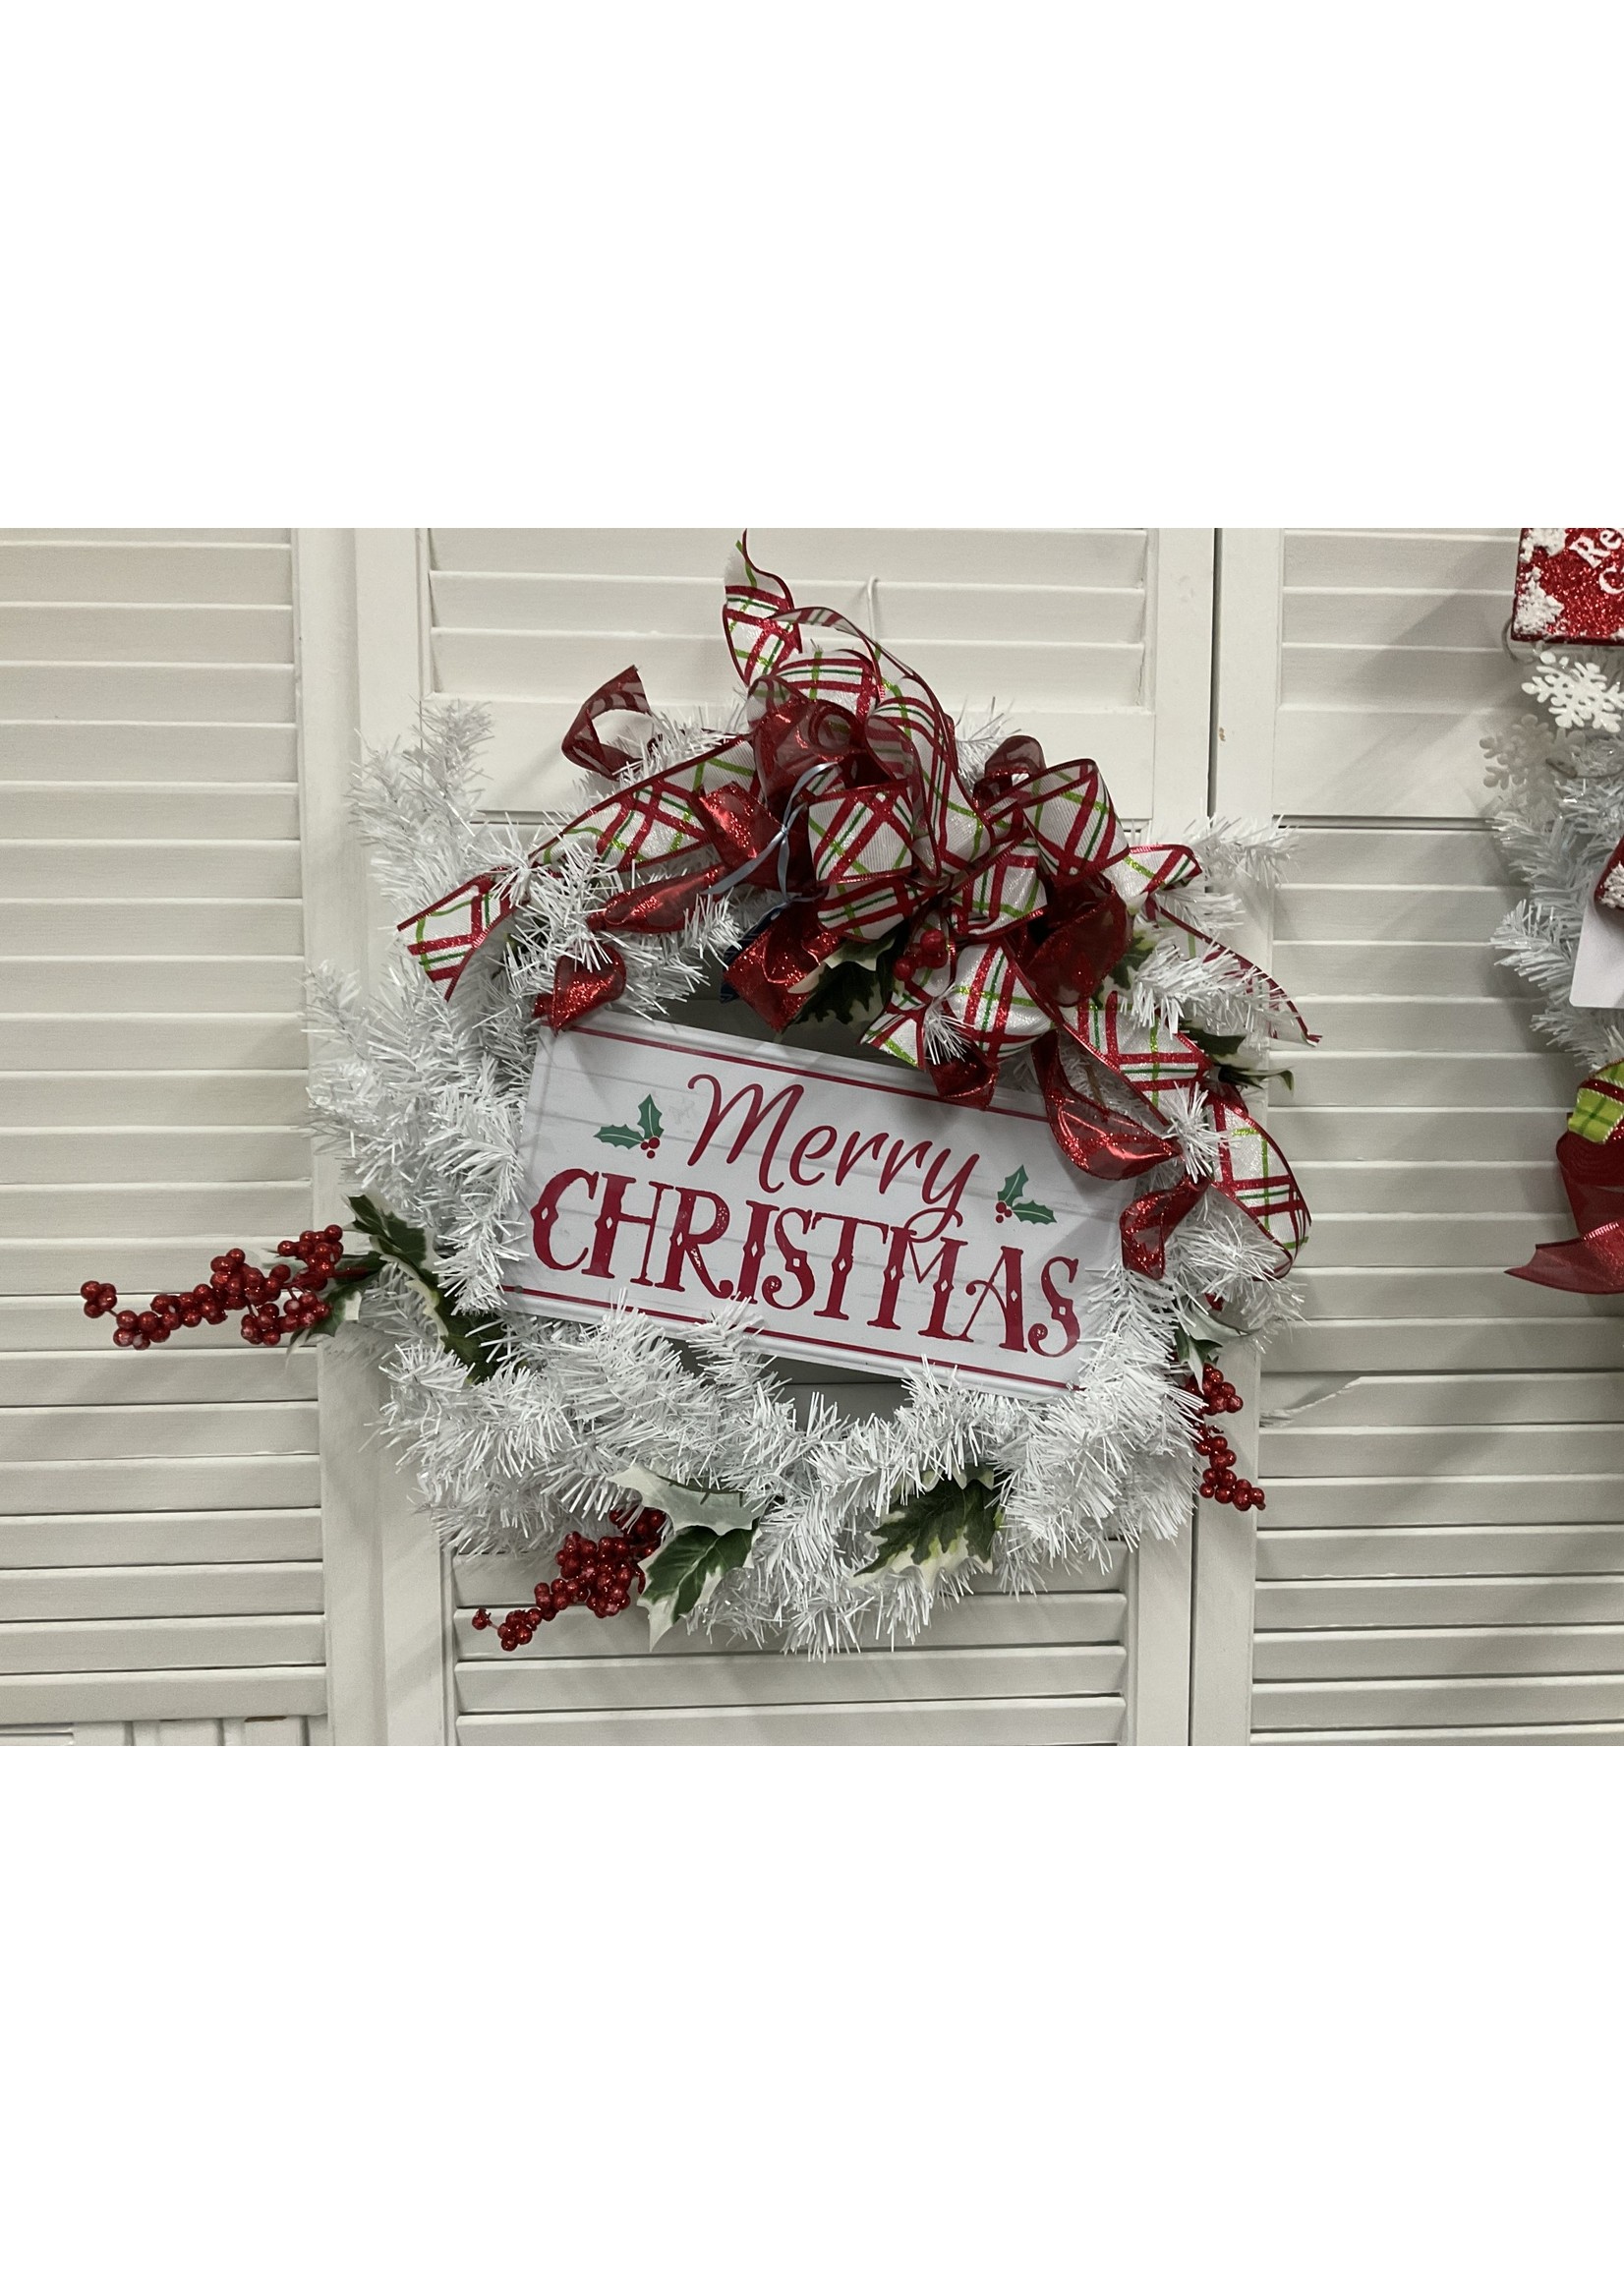 My New Favorite Thing Wreath Evergreen White "Merry Christmas" with Red and Green Ribbon 22 inch